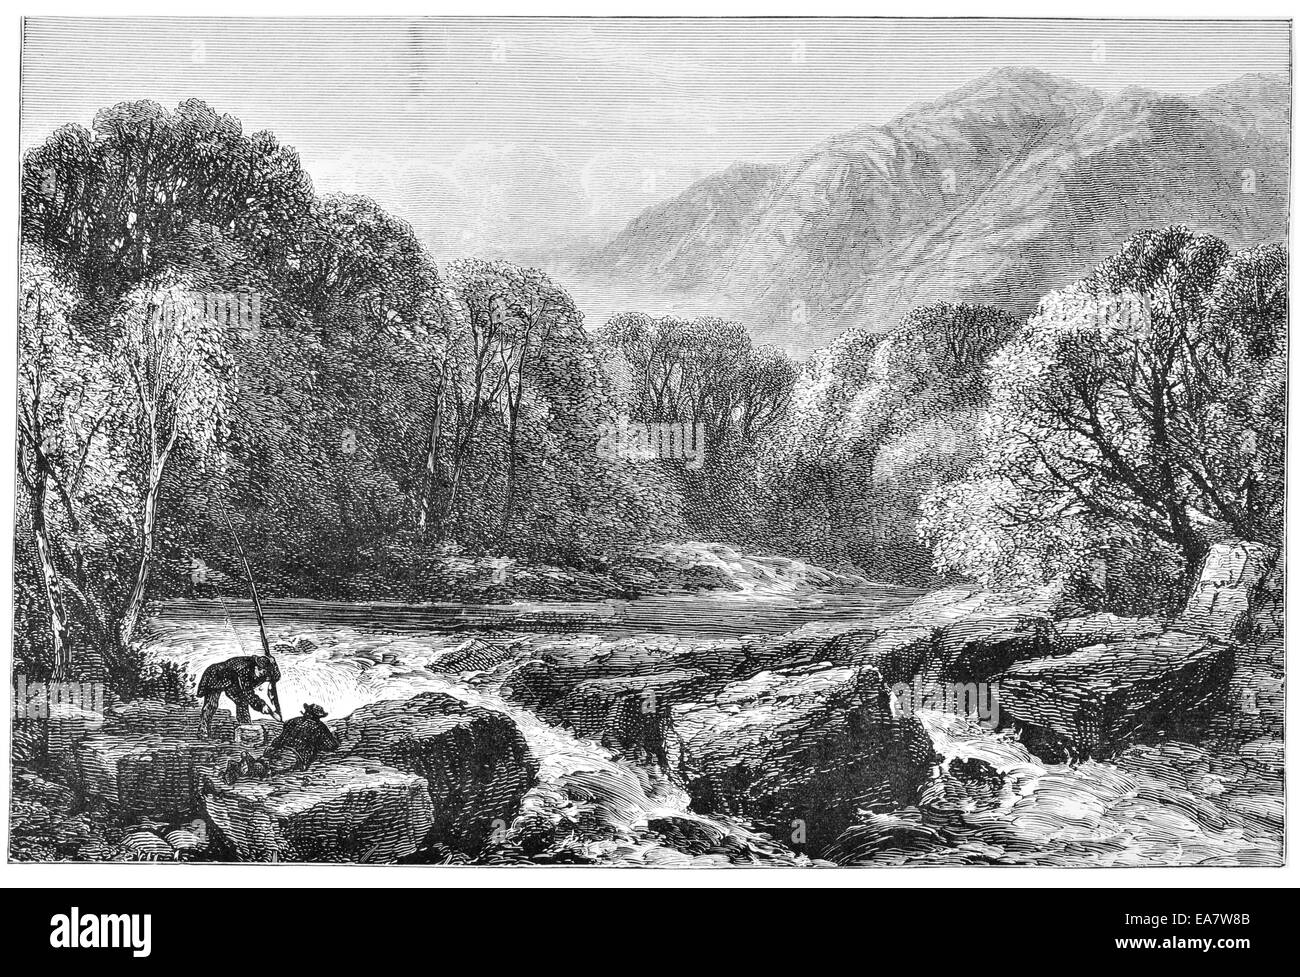 On the river Lledr near Bettws y Coed Stock Photo